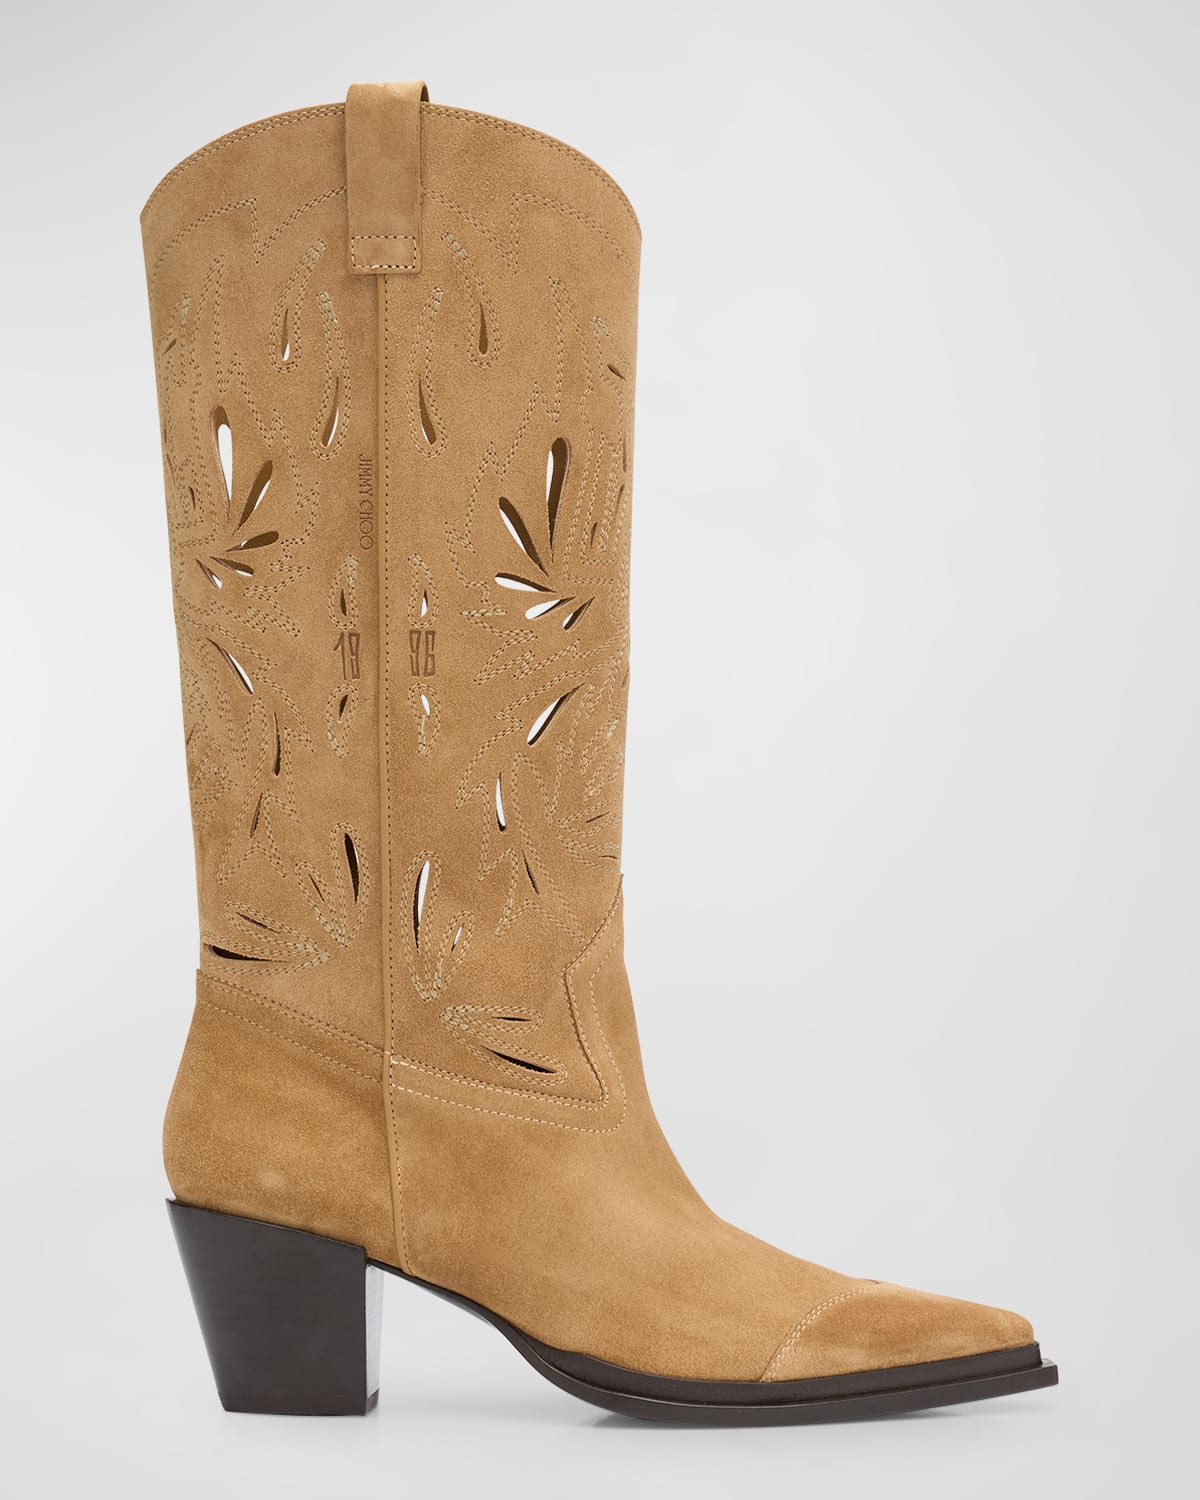 Cece Perforated Suede Western Boots